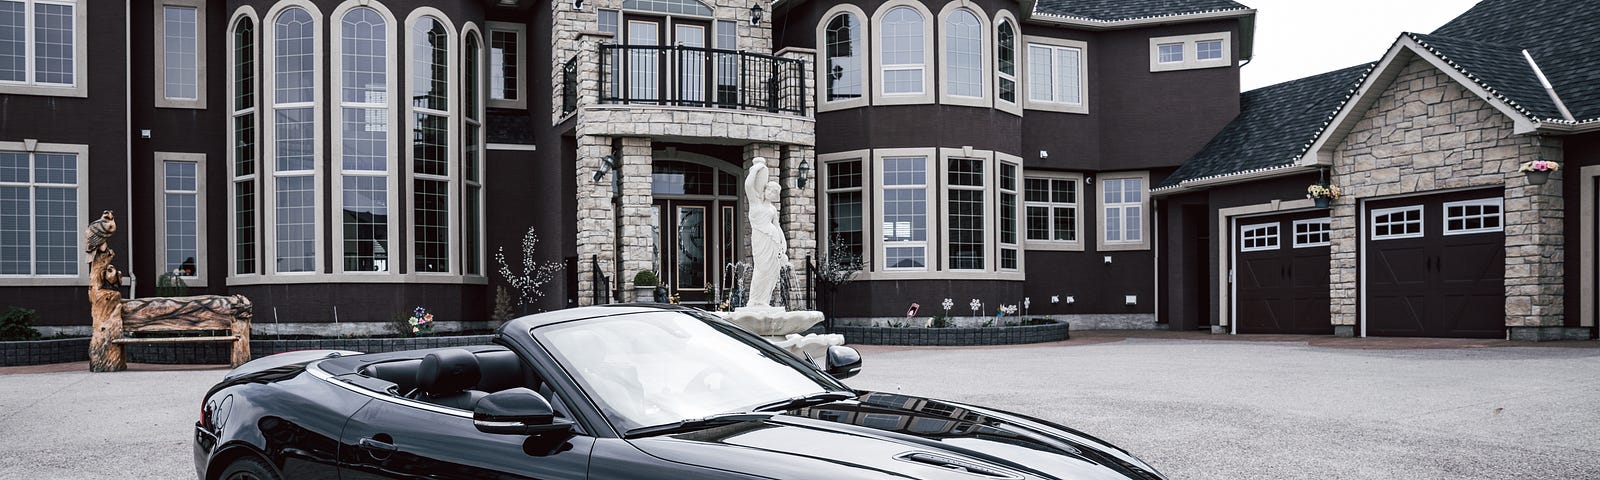 Convertible roadster in front of a mansion